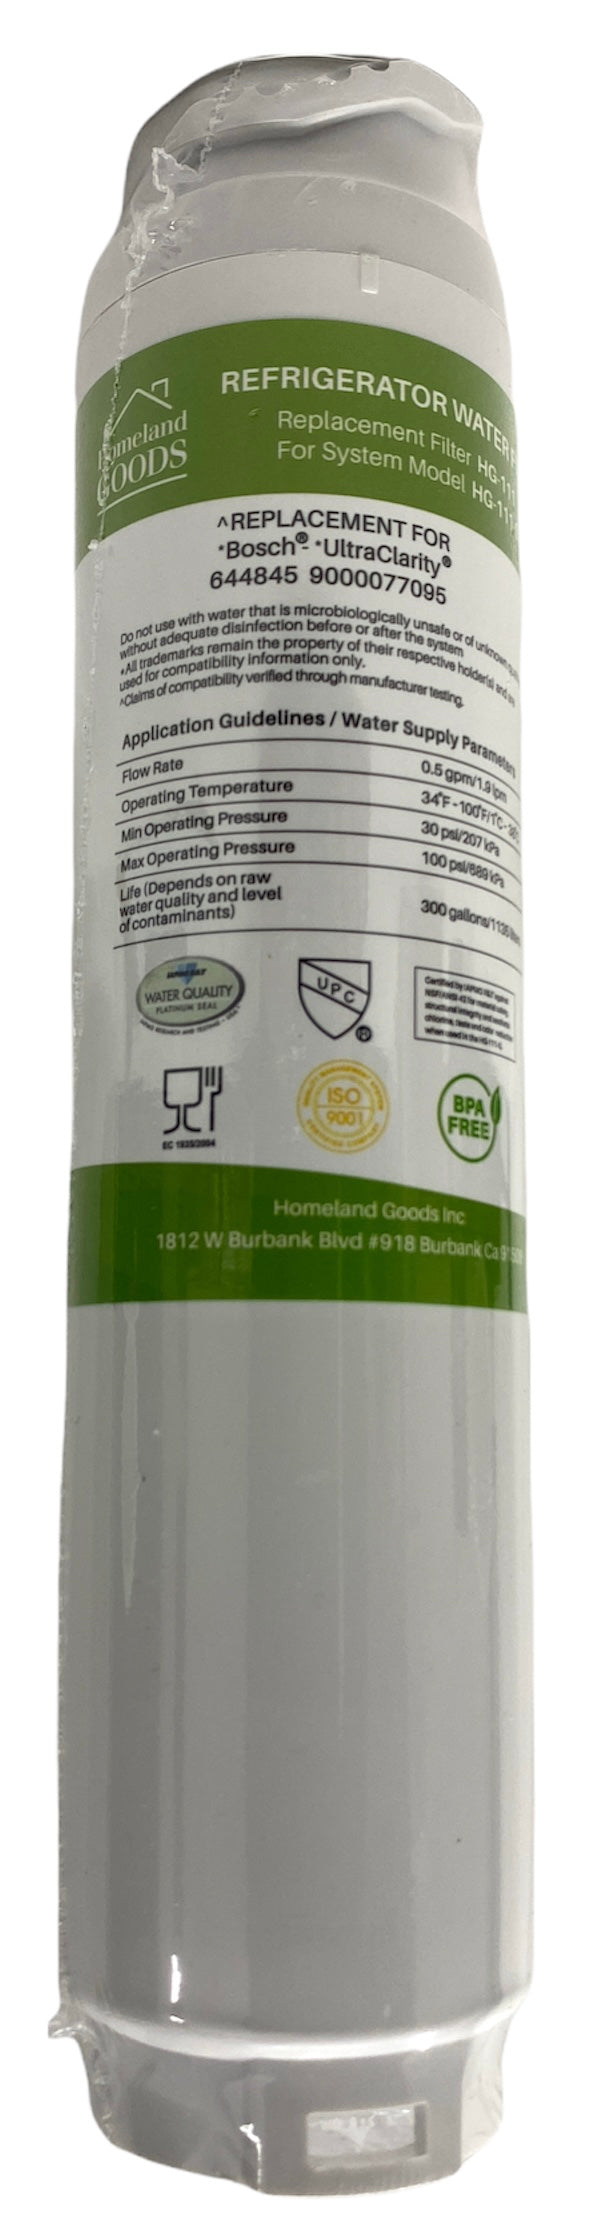 RWF3100A Refrigerator Water Filter IAPMO Certified Replacement for Bosch Ultra Clarity, 644845, 9000077104, 9000194412, 644845, 9000 077104, B26FT70SNS, Haier 0060820860, 0060218744, Miele KWF1000 Refrigerator Water Filter